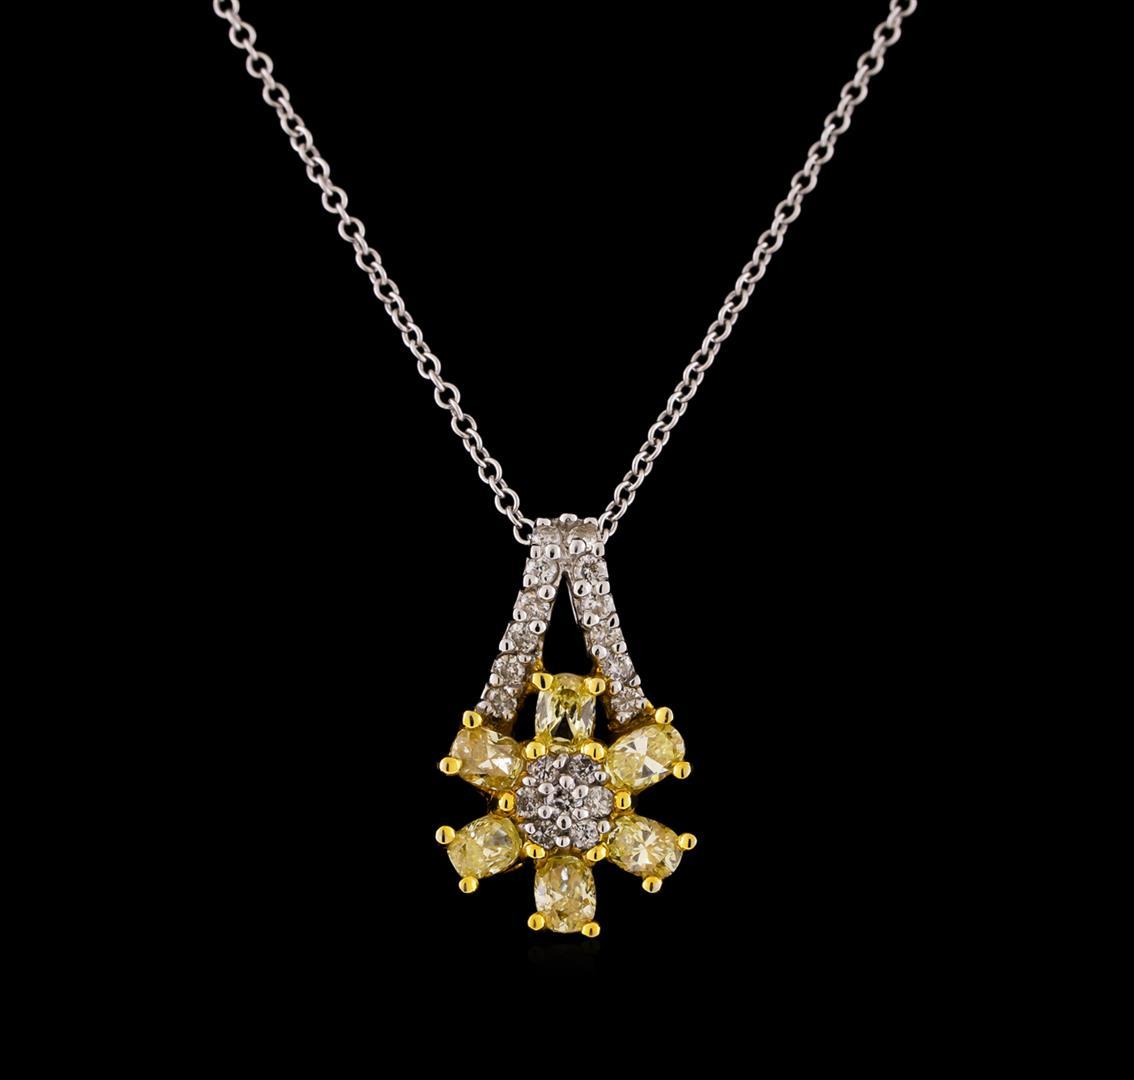 0.85 ctw Diamond Pendant With Chain - 18KT Two-Tone Gold